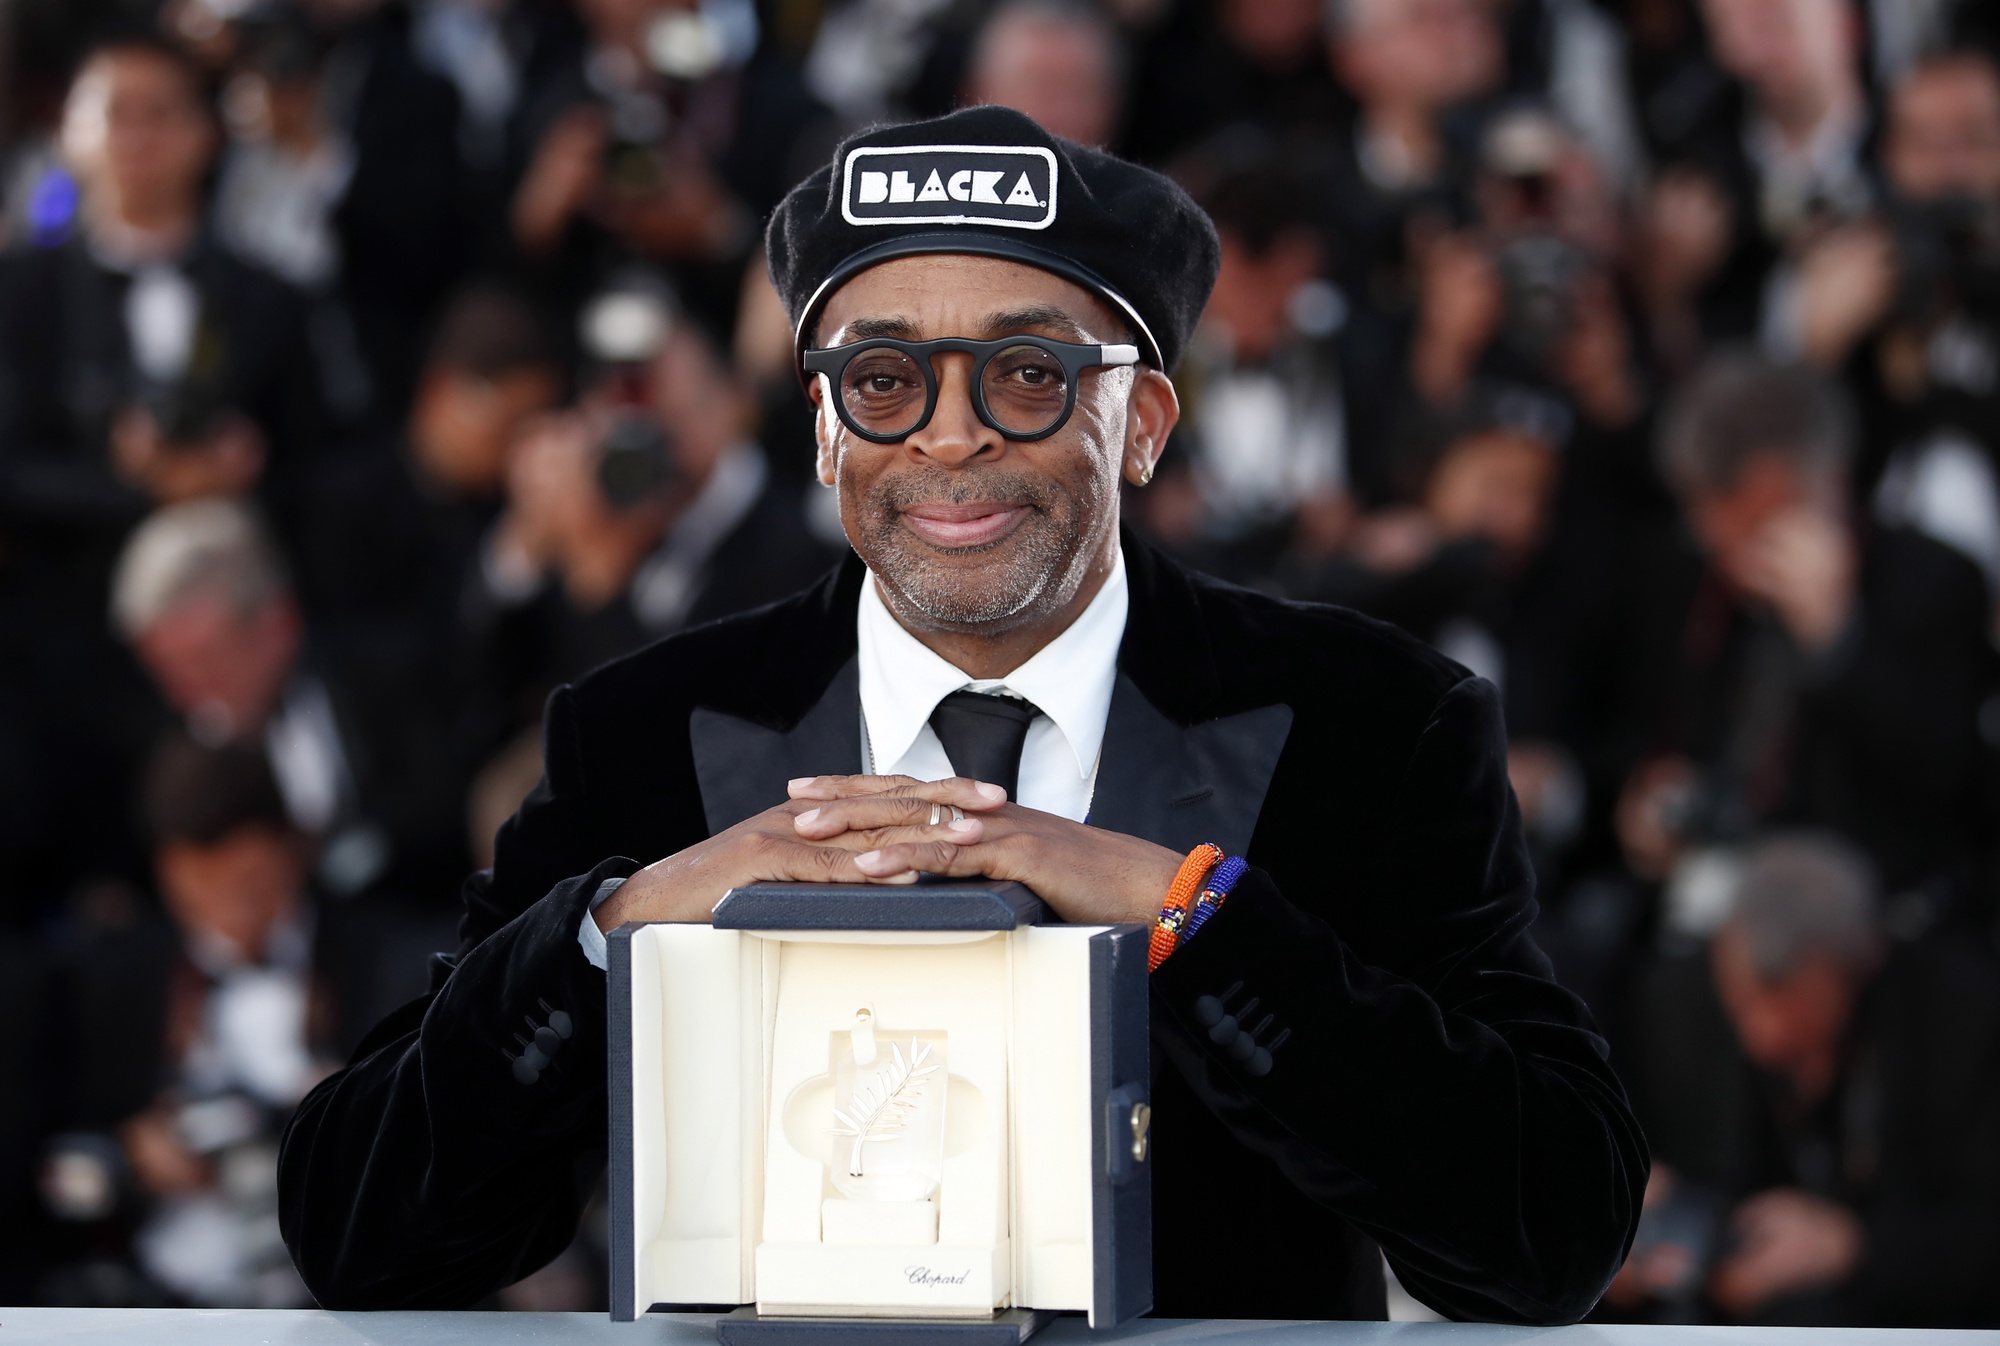 epa09298661 (FILE) - US filmmaker Spike Lee poses during the Award Winners photocall after he won the Grand Jury Prize for &#039;BlacKkKlansman&#039; at the 71st annual Cannes Film Festival in Cannes, France, 19 May 2018 (reissued 24 June 2021). Lee was selected as Jury President for the international Competition of the 74th Cannes Film Festival, organizers announced on 24 June 2021. The festival will run from 06 to 17 July 2021  EPA/FRANCK ROBICHON *** Local Caption *** 56766703